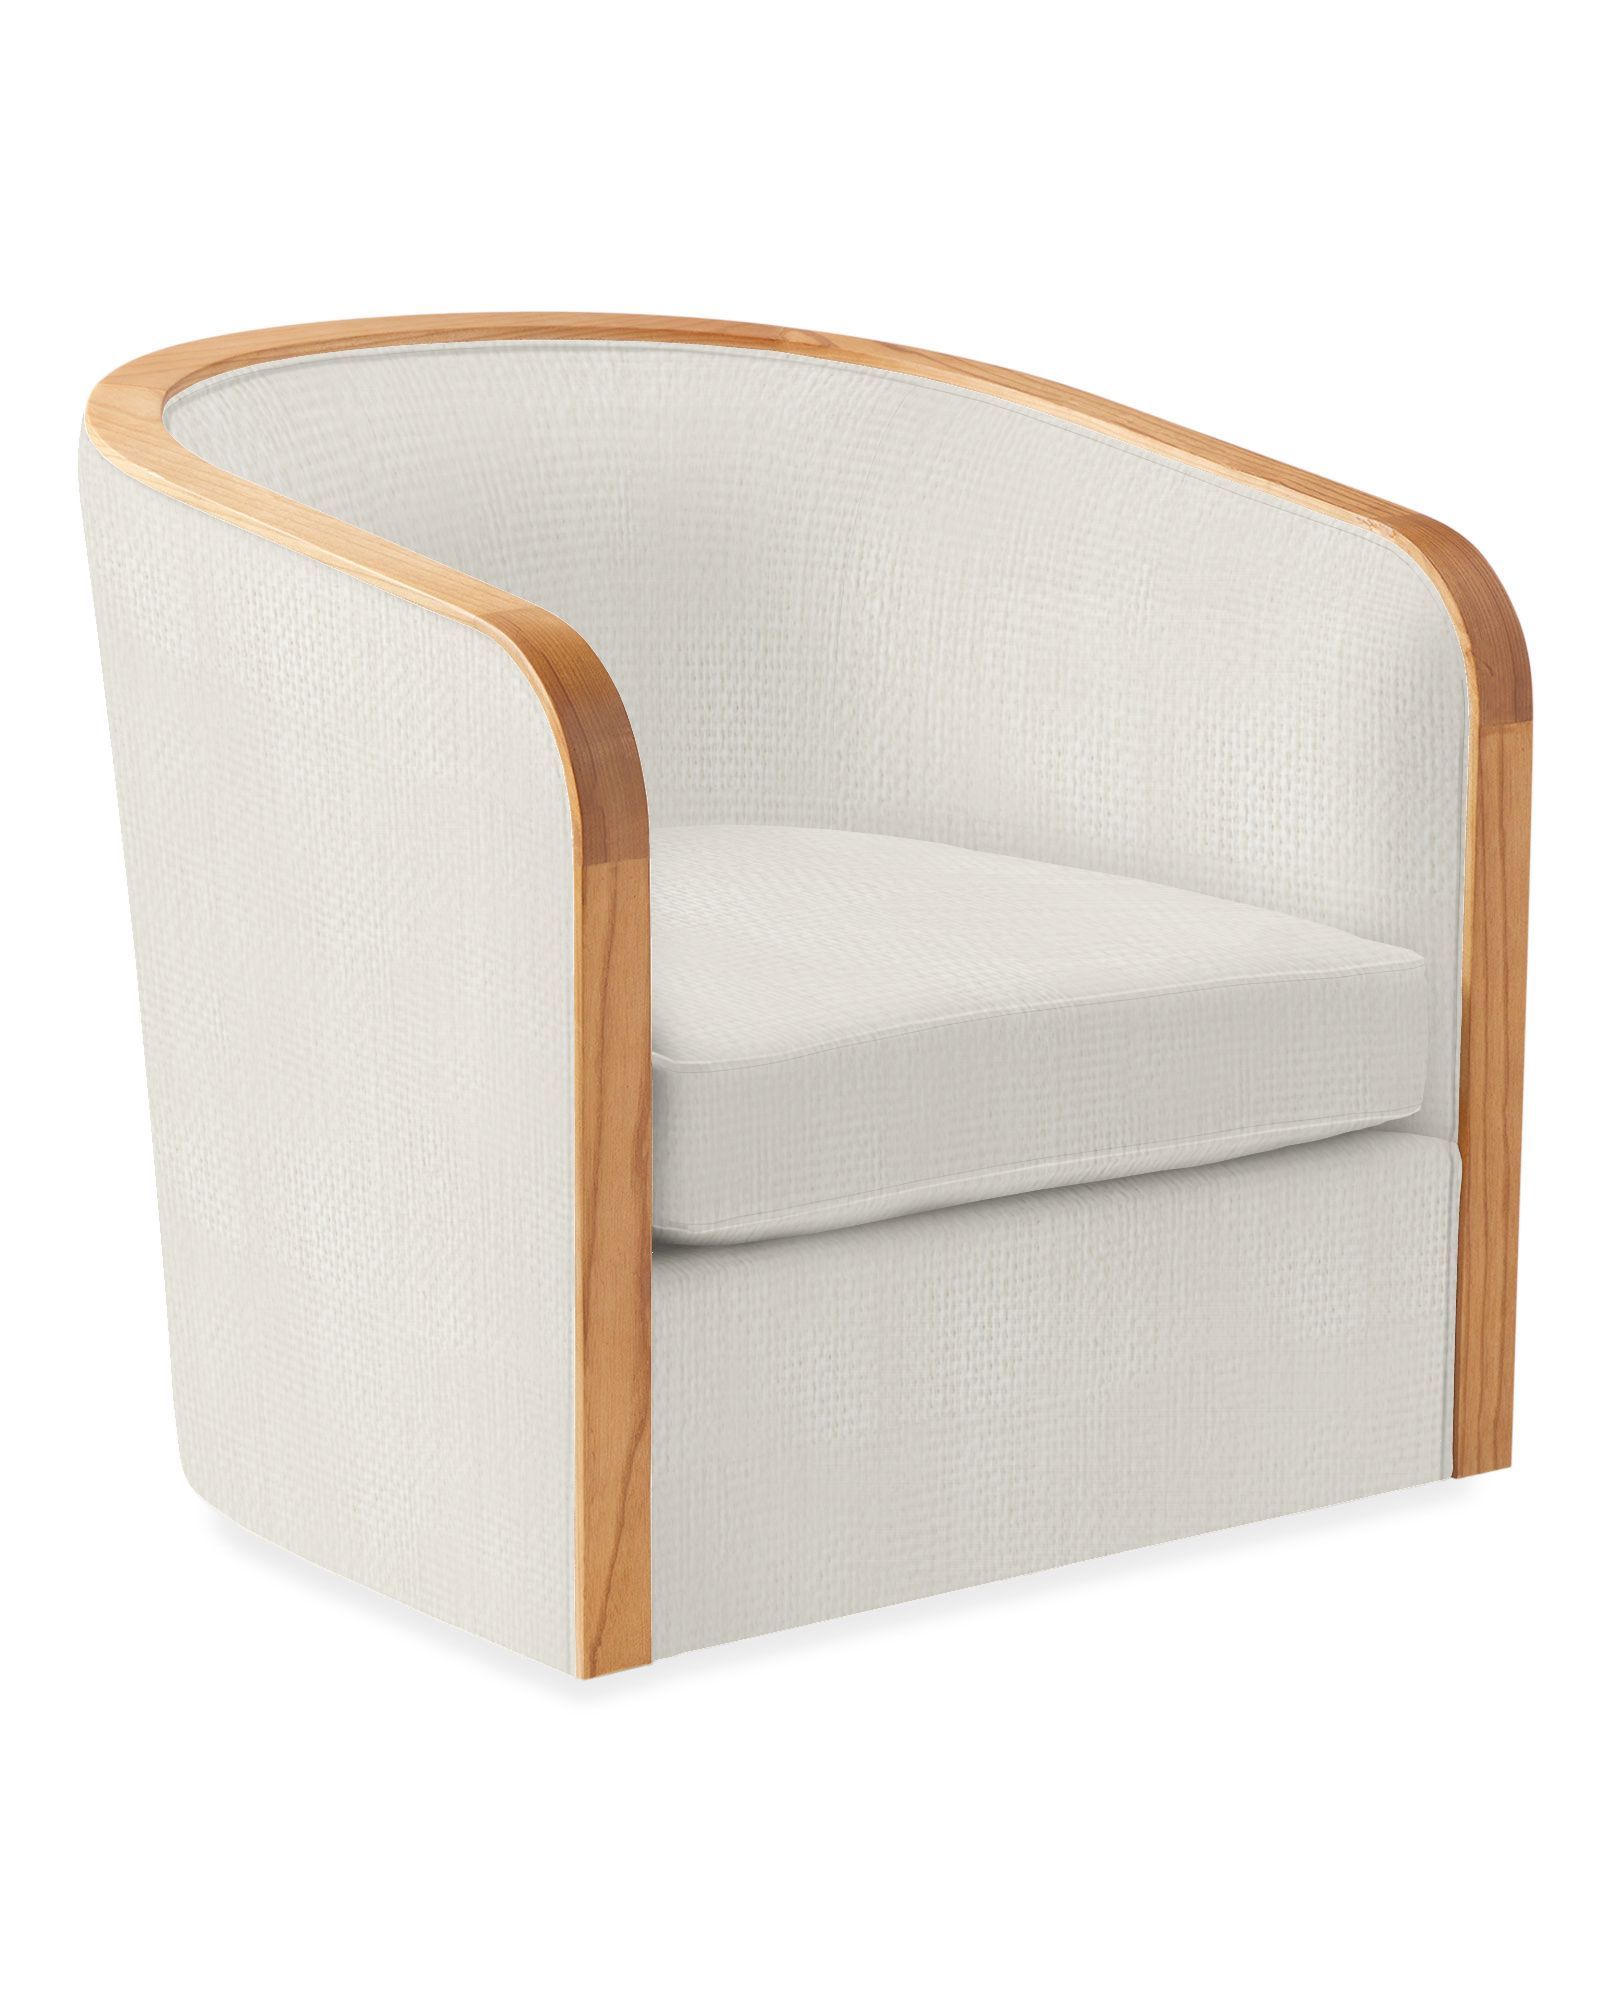 Bleeker Swivel Chair | Serena and Lily